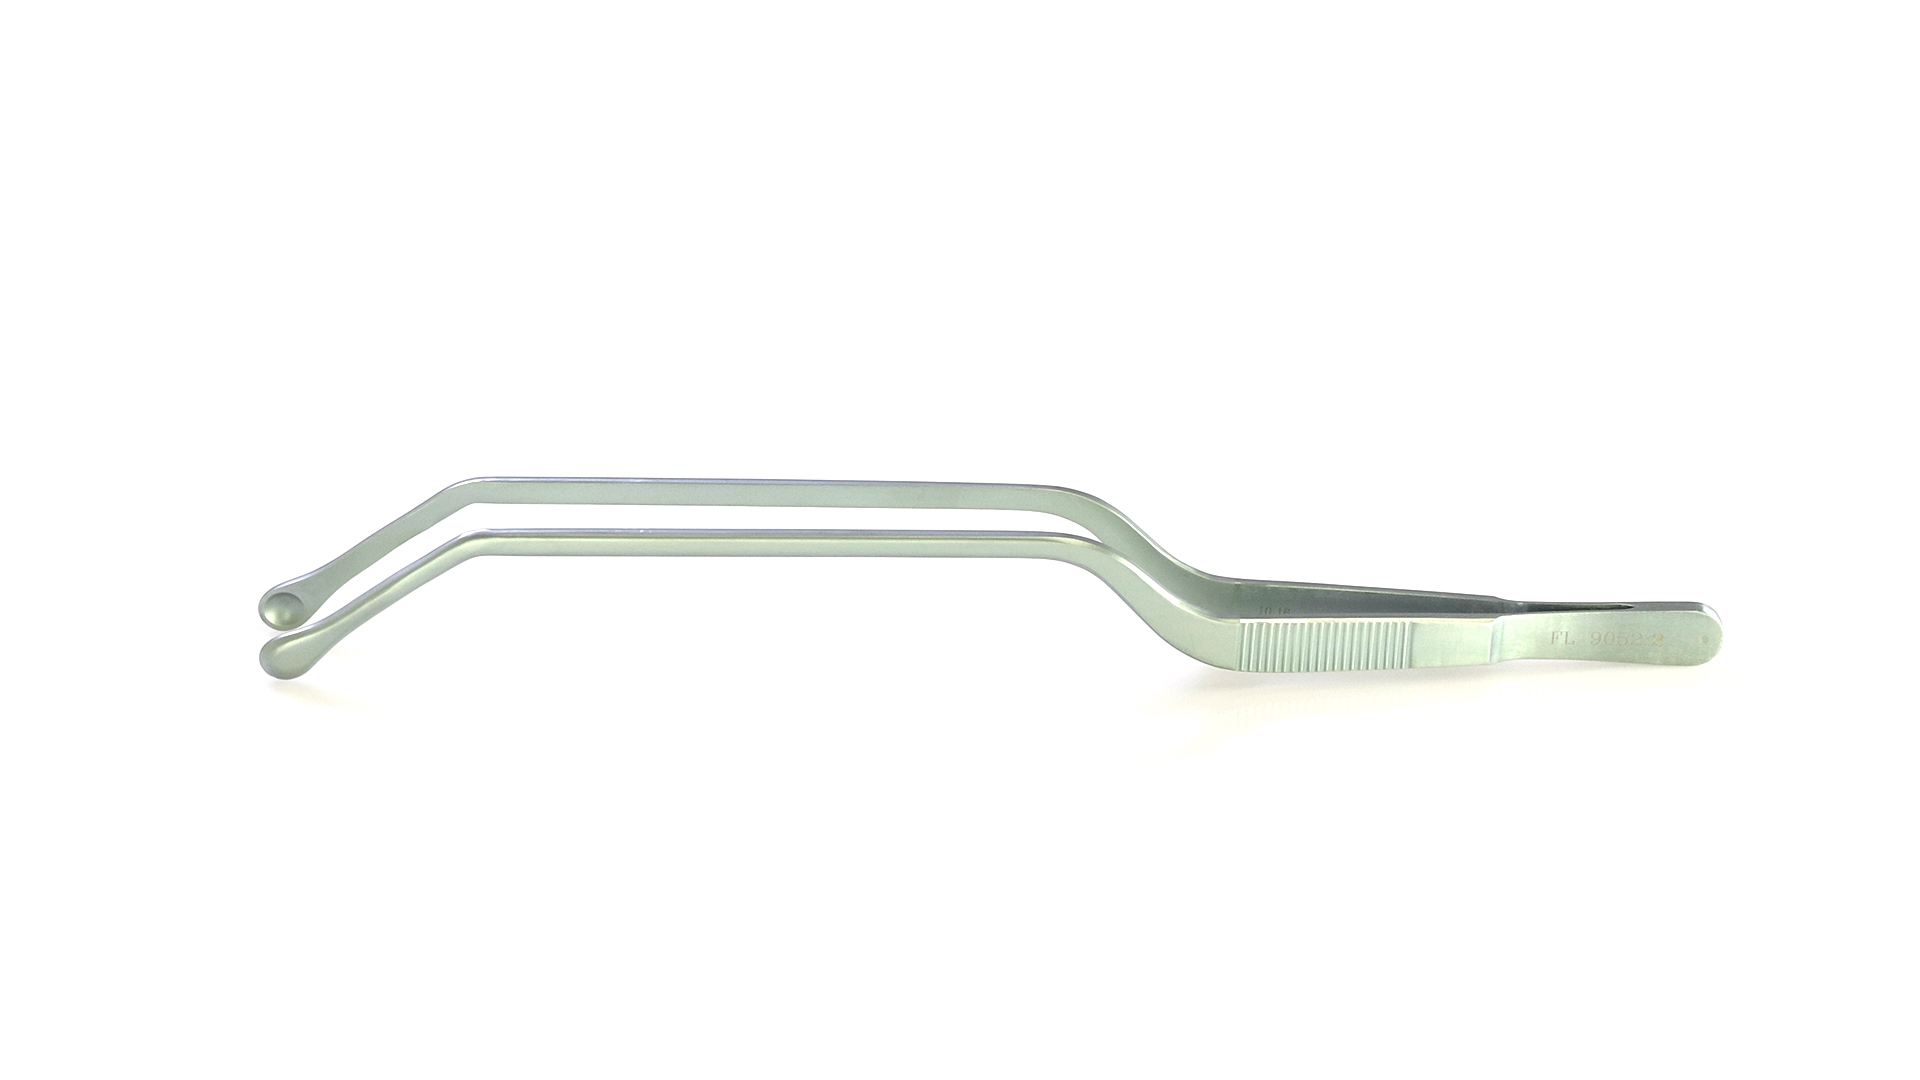 Adson Hypophyseal Forceps - Curved Down 6mm cup tips